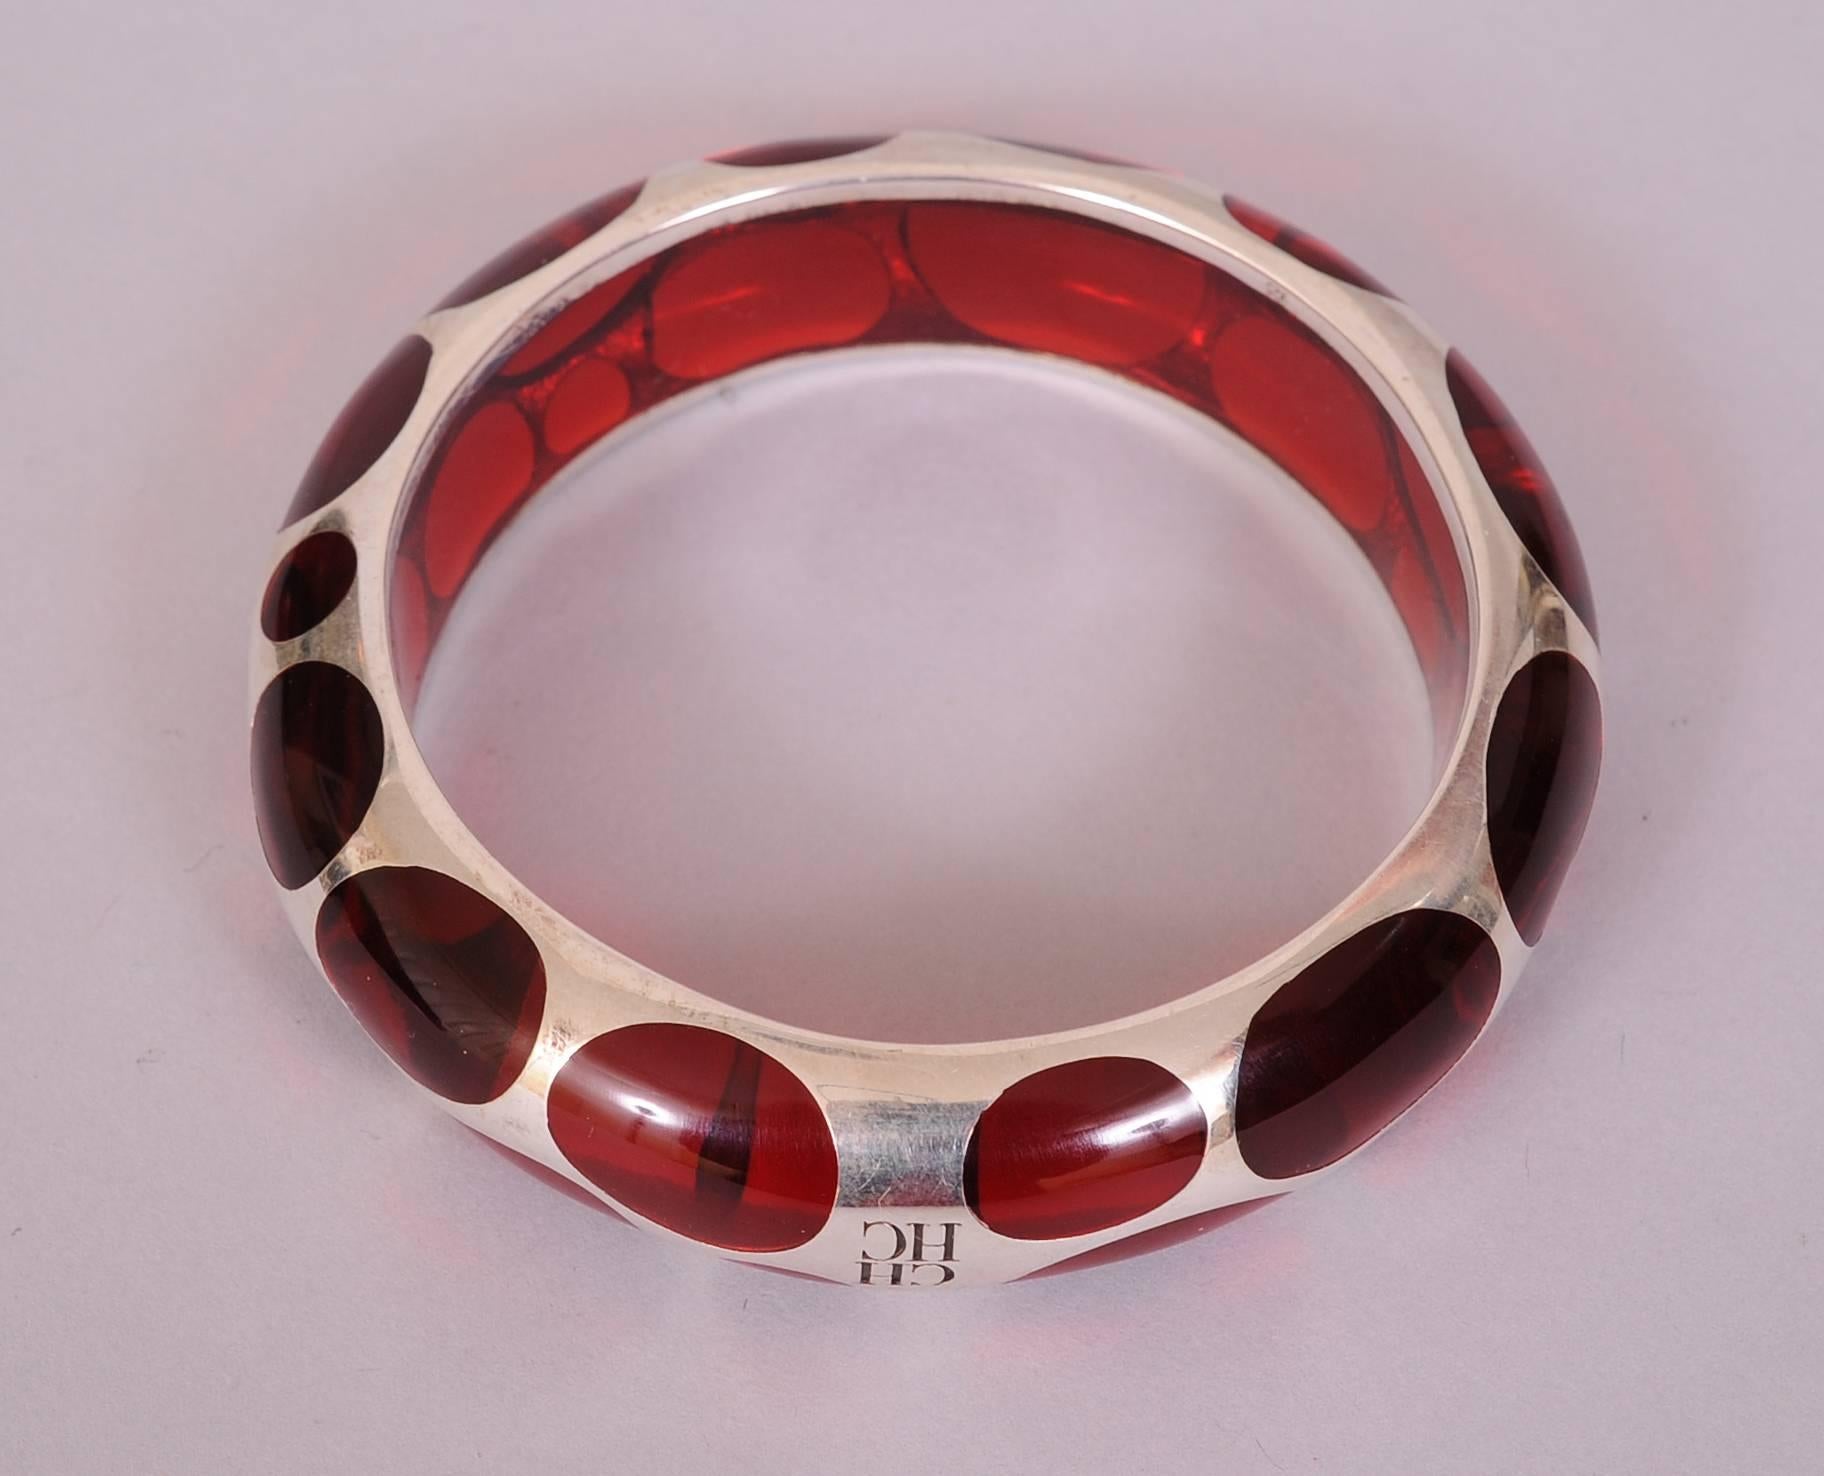 This Bangle bracelet is both stylish and fun. The play of sterling silver and red Lucite is quite witty. The negative space in the silver creates polka dots i a range of sizes. The bracelet is signed with the CH logo and it is in excellent